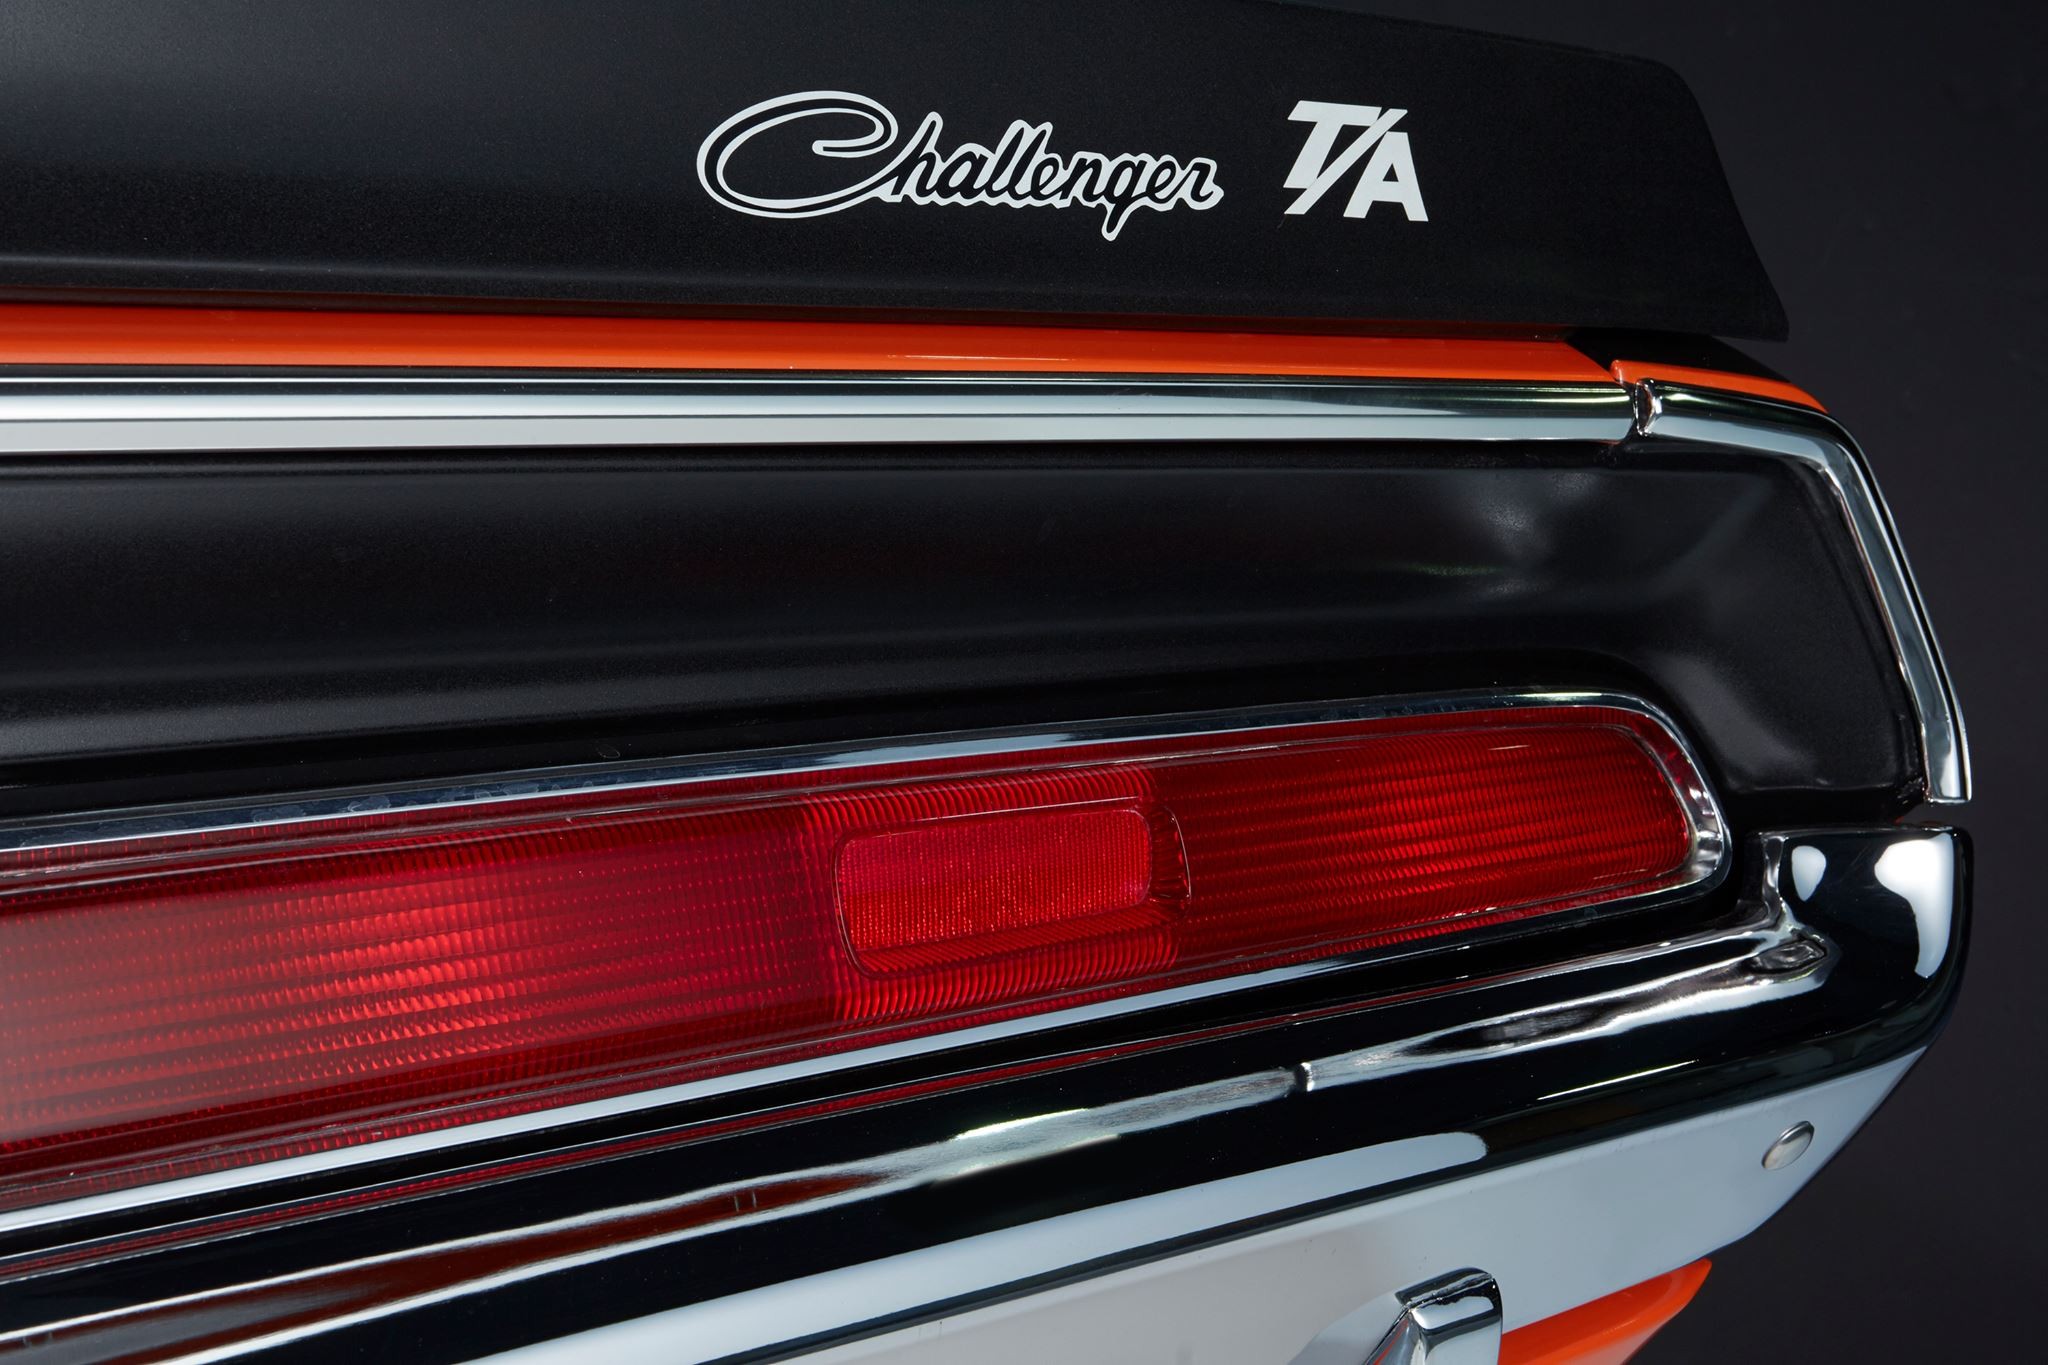 General 2048x1365 Dodge Challenger Dodge car vehicle taillights closeup black cars muscle cars American cars